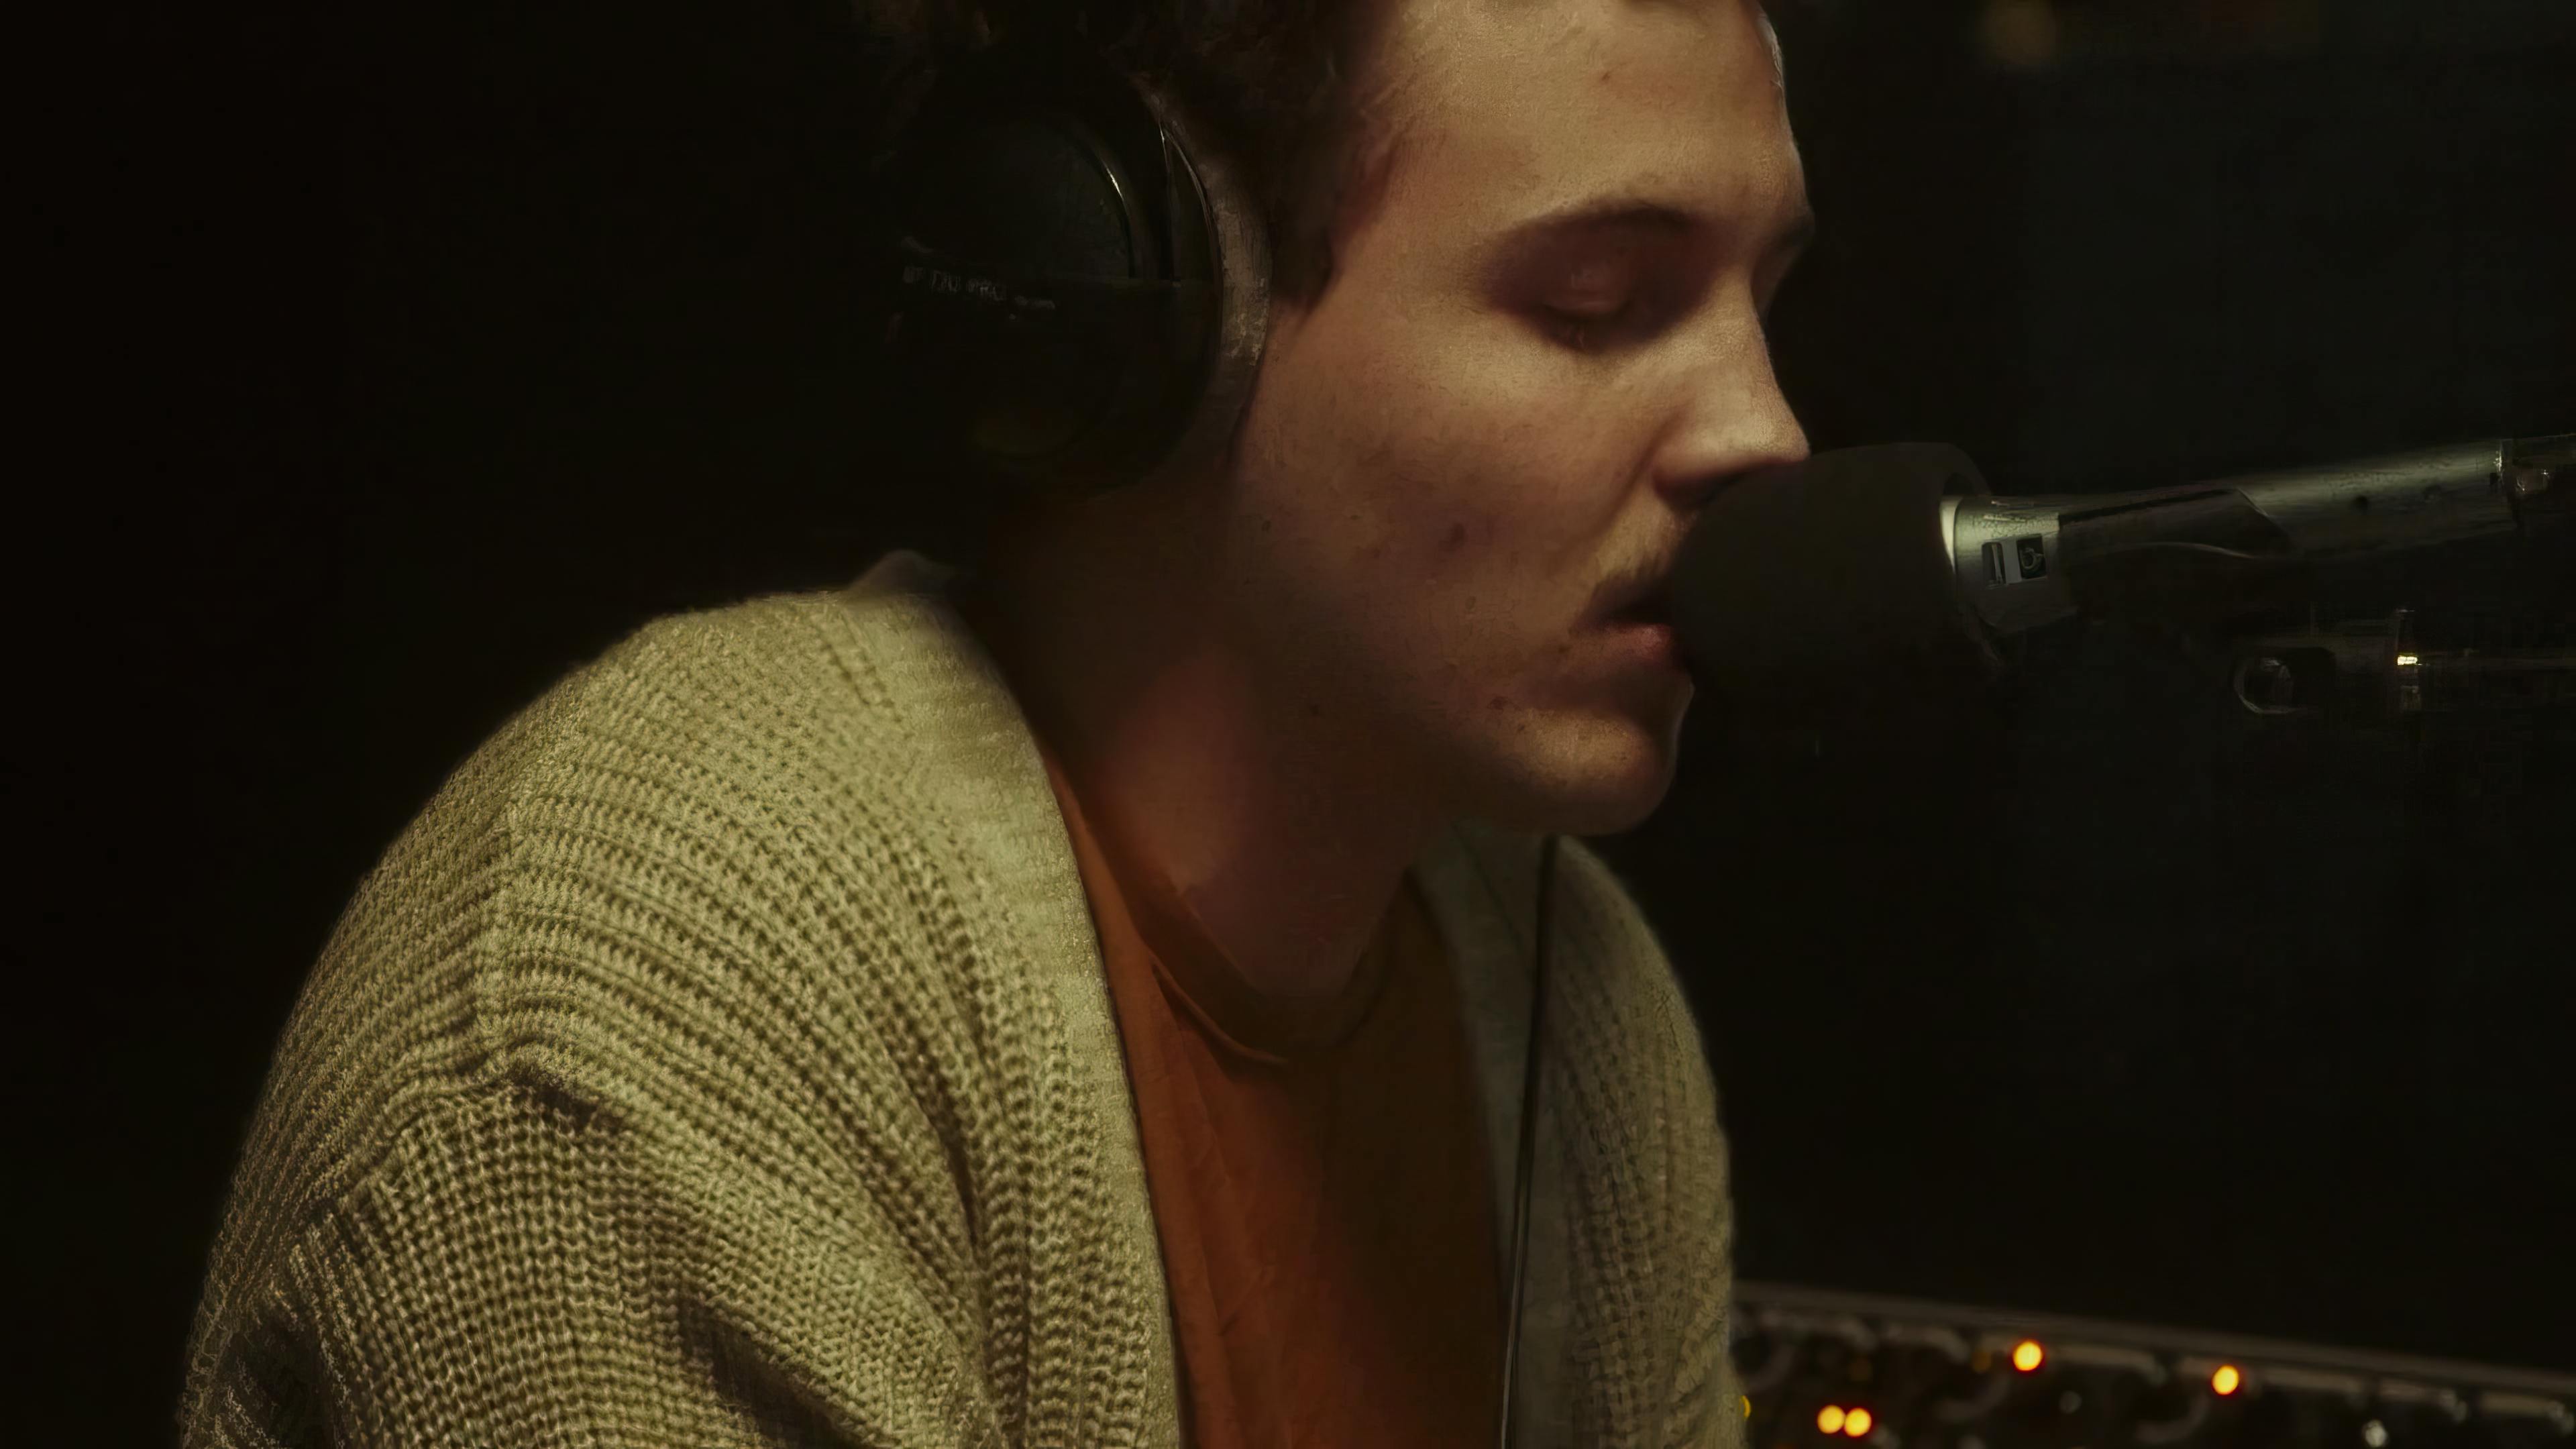 In a dimly lit room, an artist, Ritt Momney, is captured mid-performance during a live session. He's engrossed in singing into a microphone, wearing headphones and a cozy beige cardigan over an orange shirt. His closed eyes and serene expression suggest a deep connection to the music he's creating, conveying a sense of intimacy and focus in the moment.